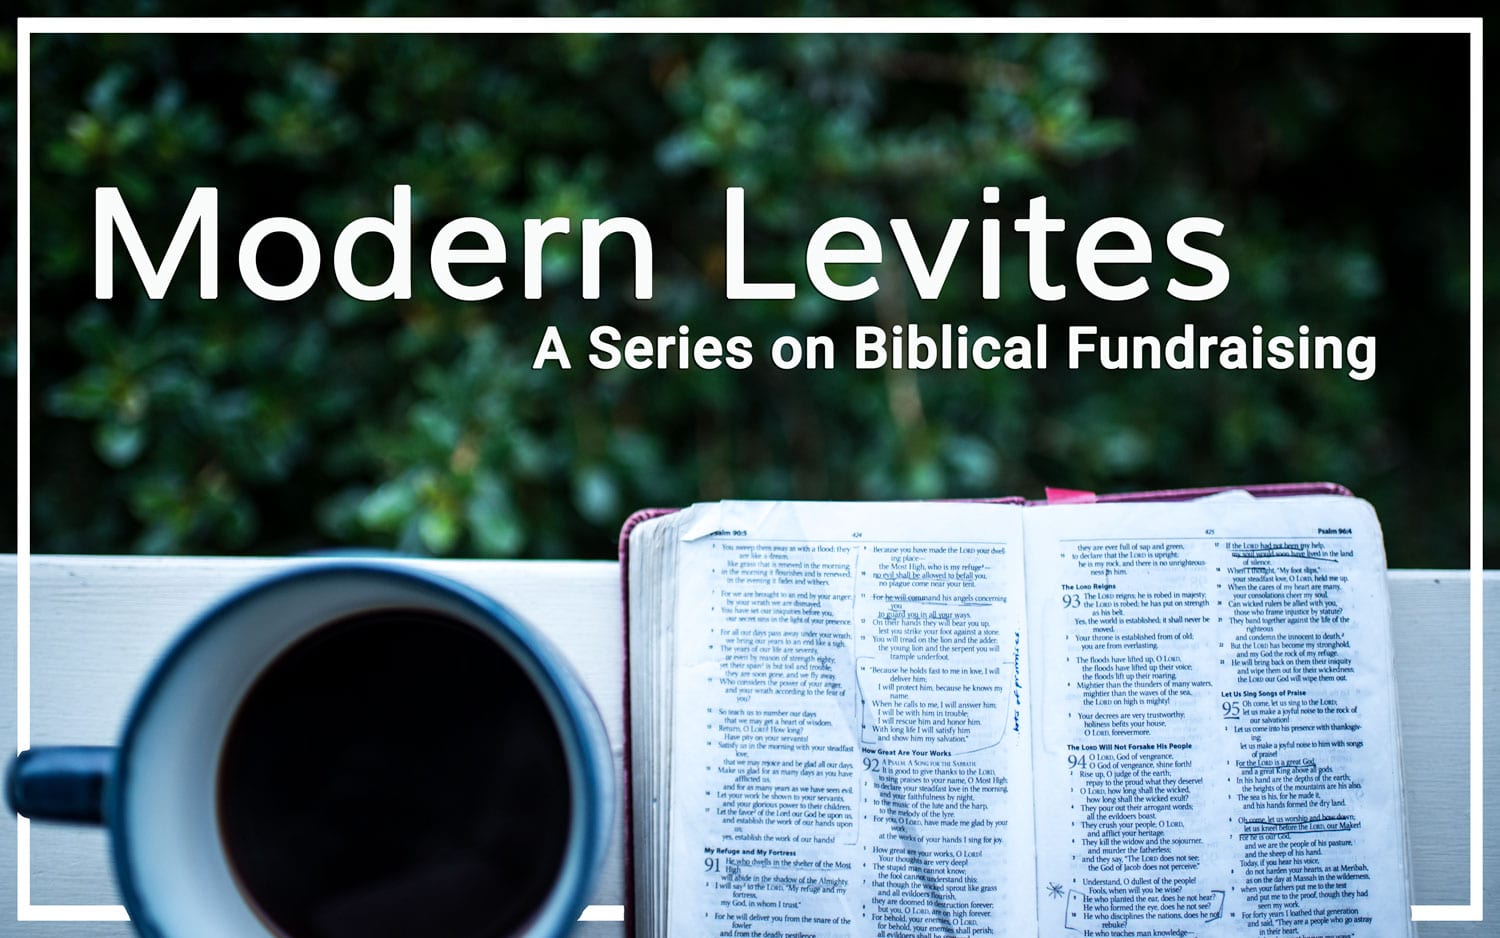 Modern Levites: a Series on Biblical Fundraising